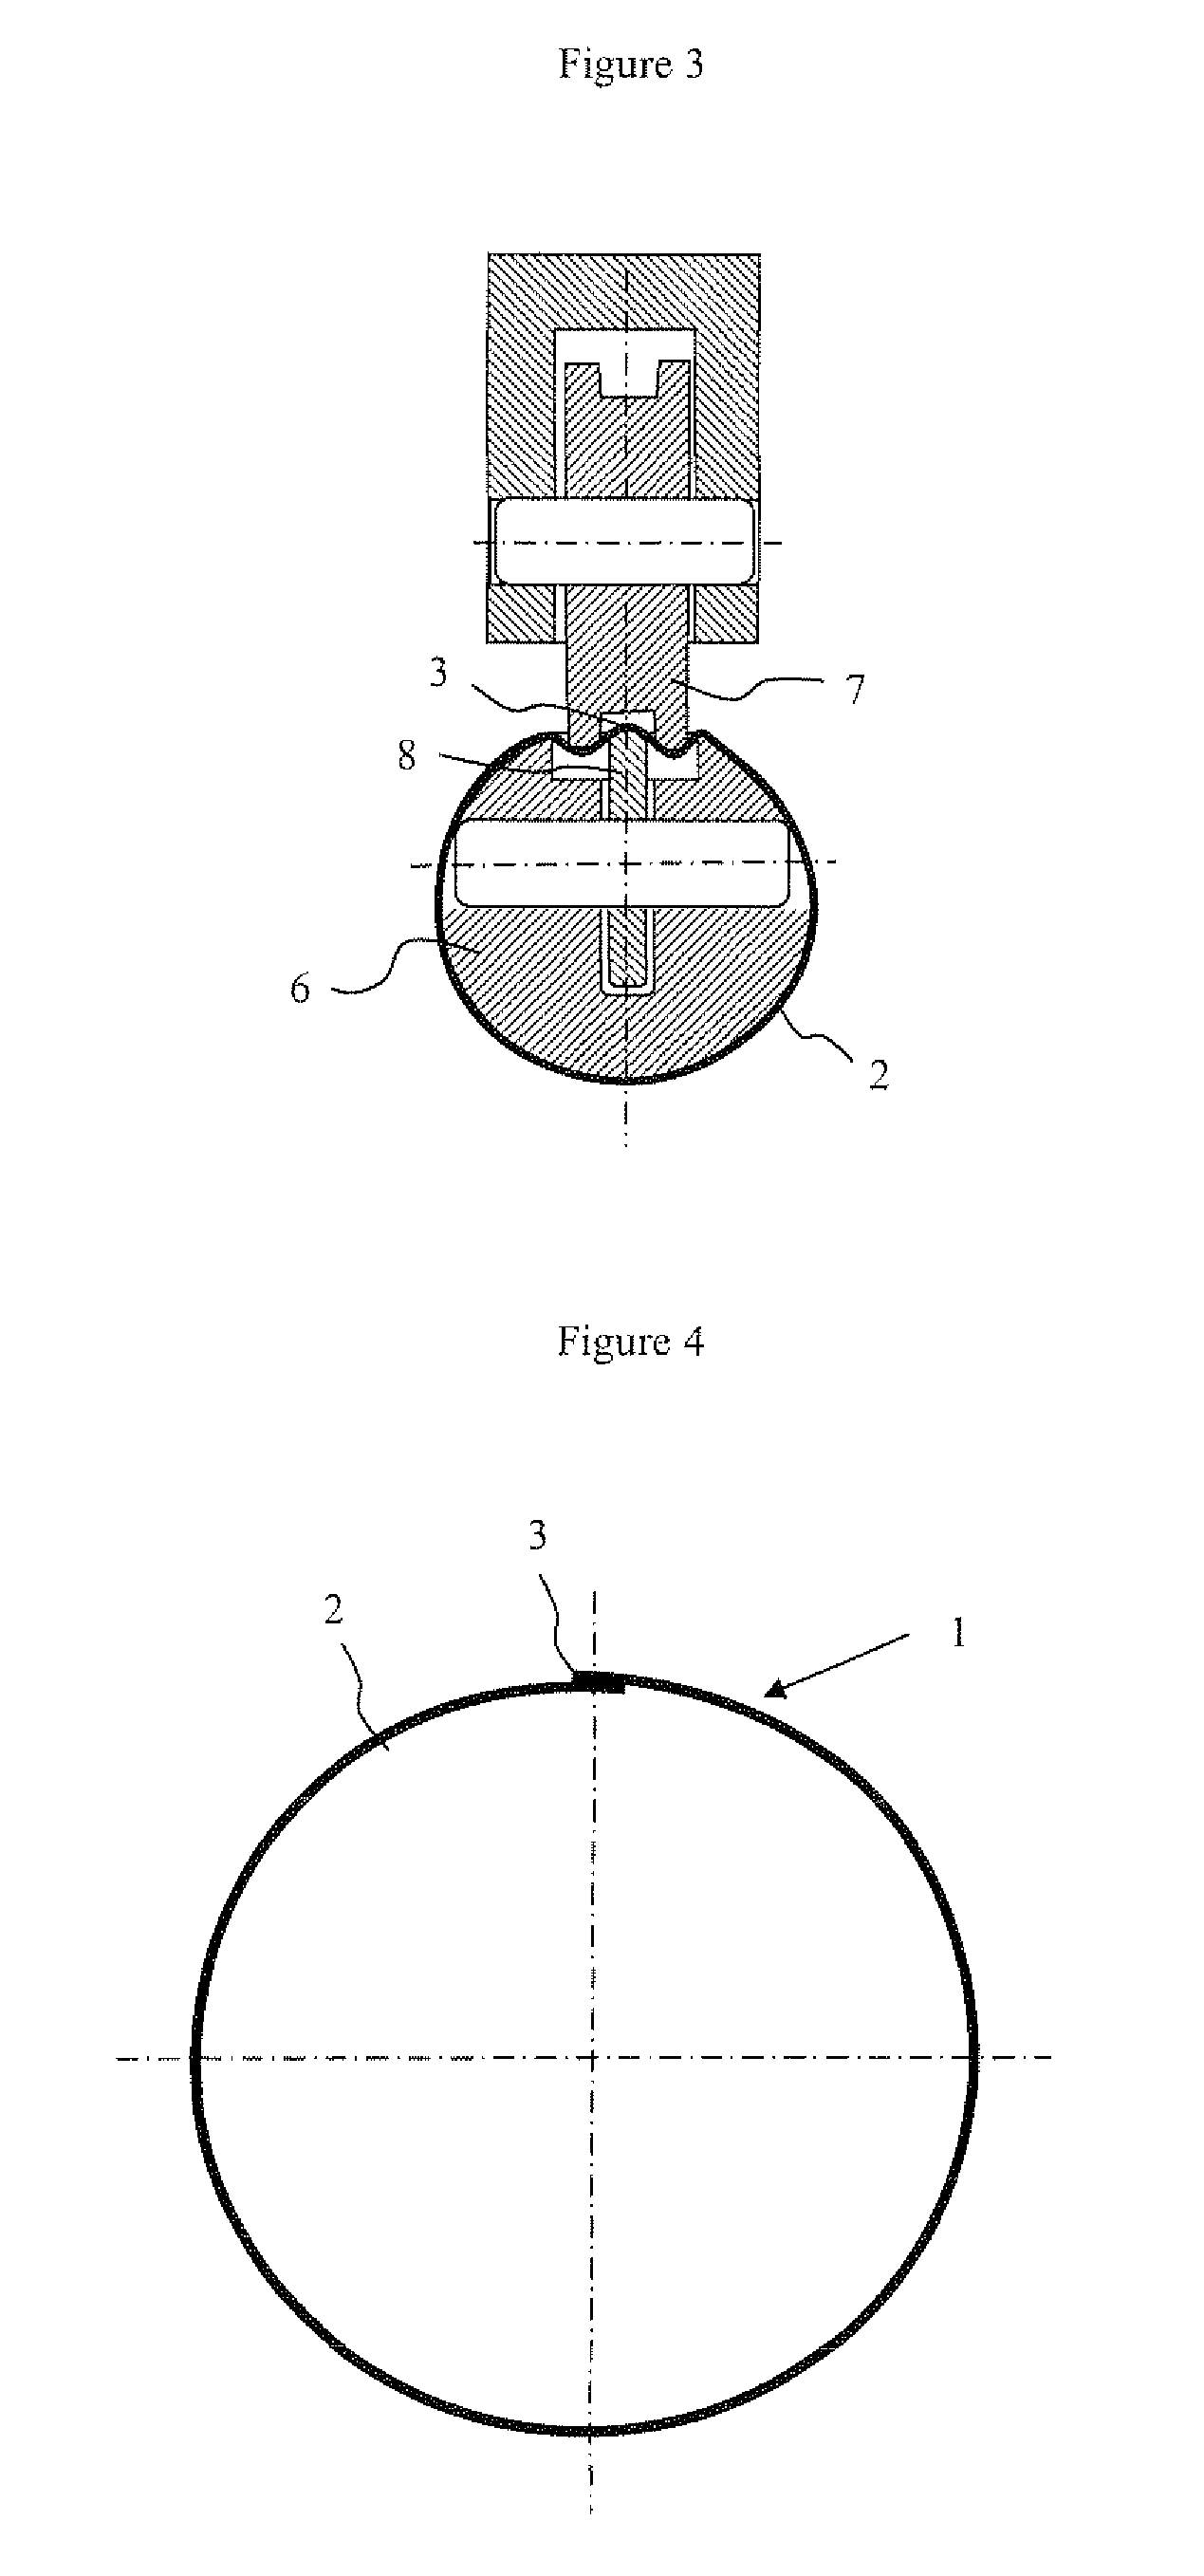 Method for manufacturing tubes by welding